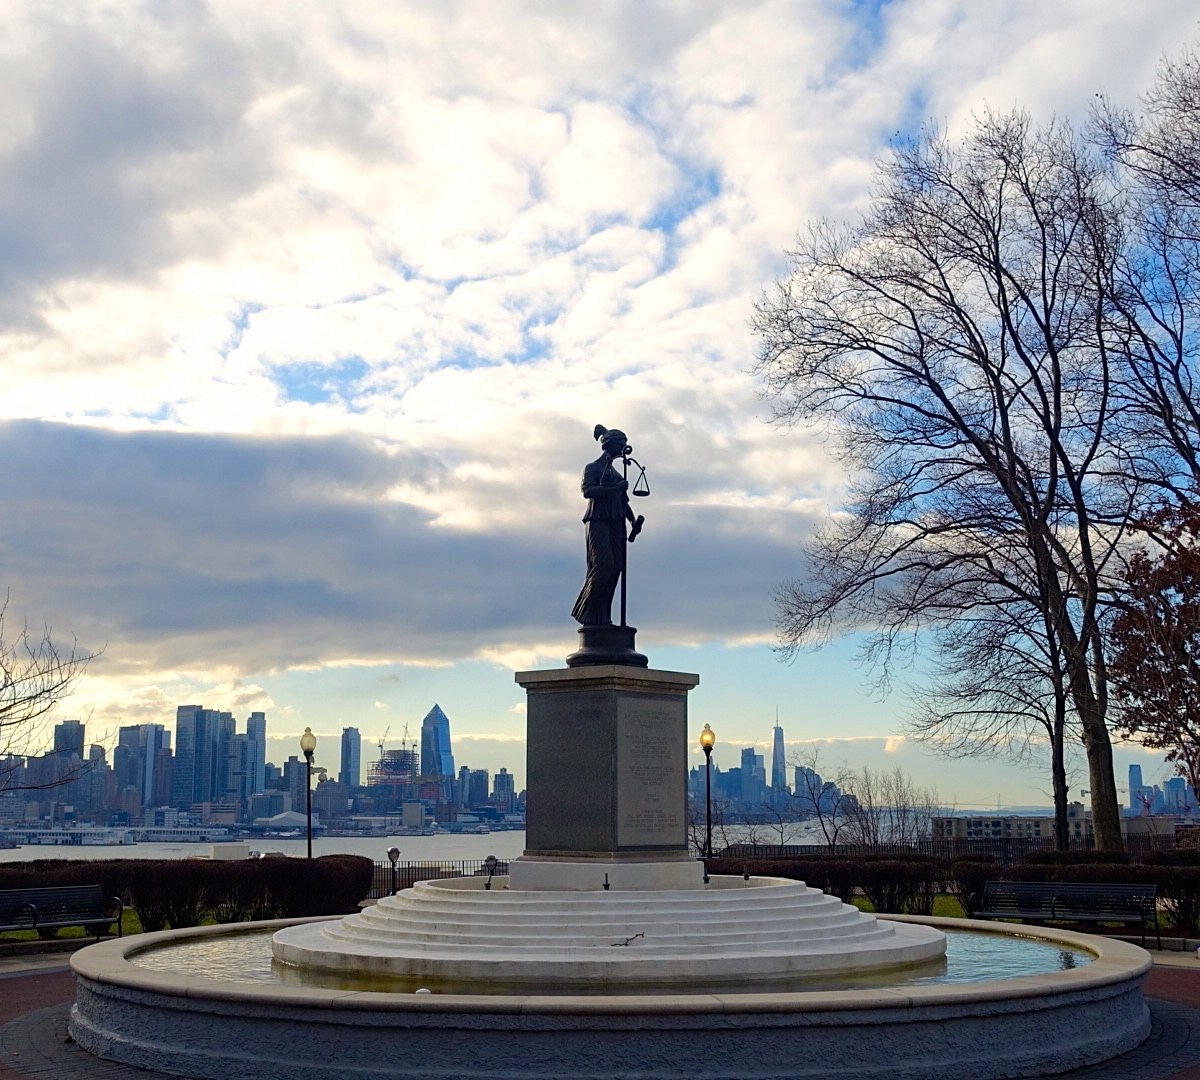 A statue in a park overlooking the New York City skyline.